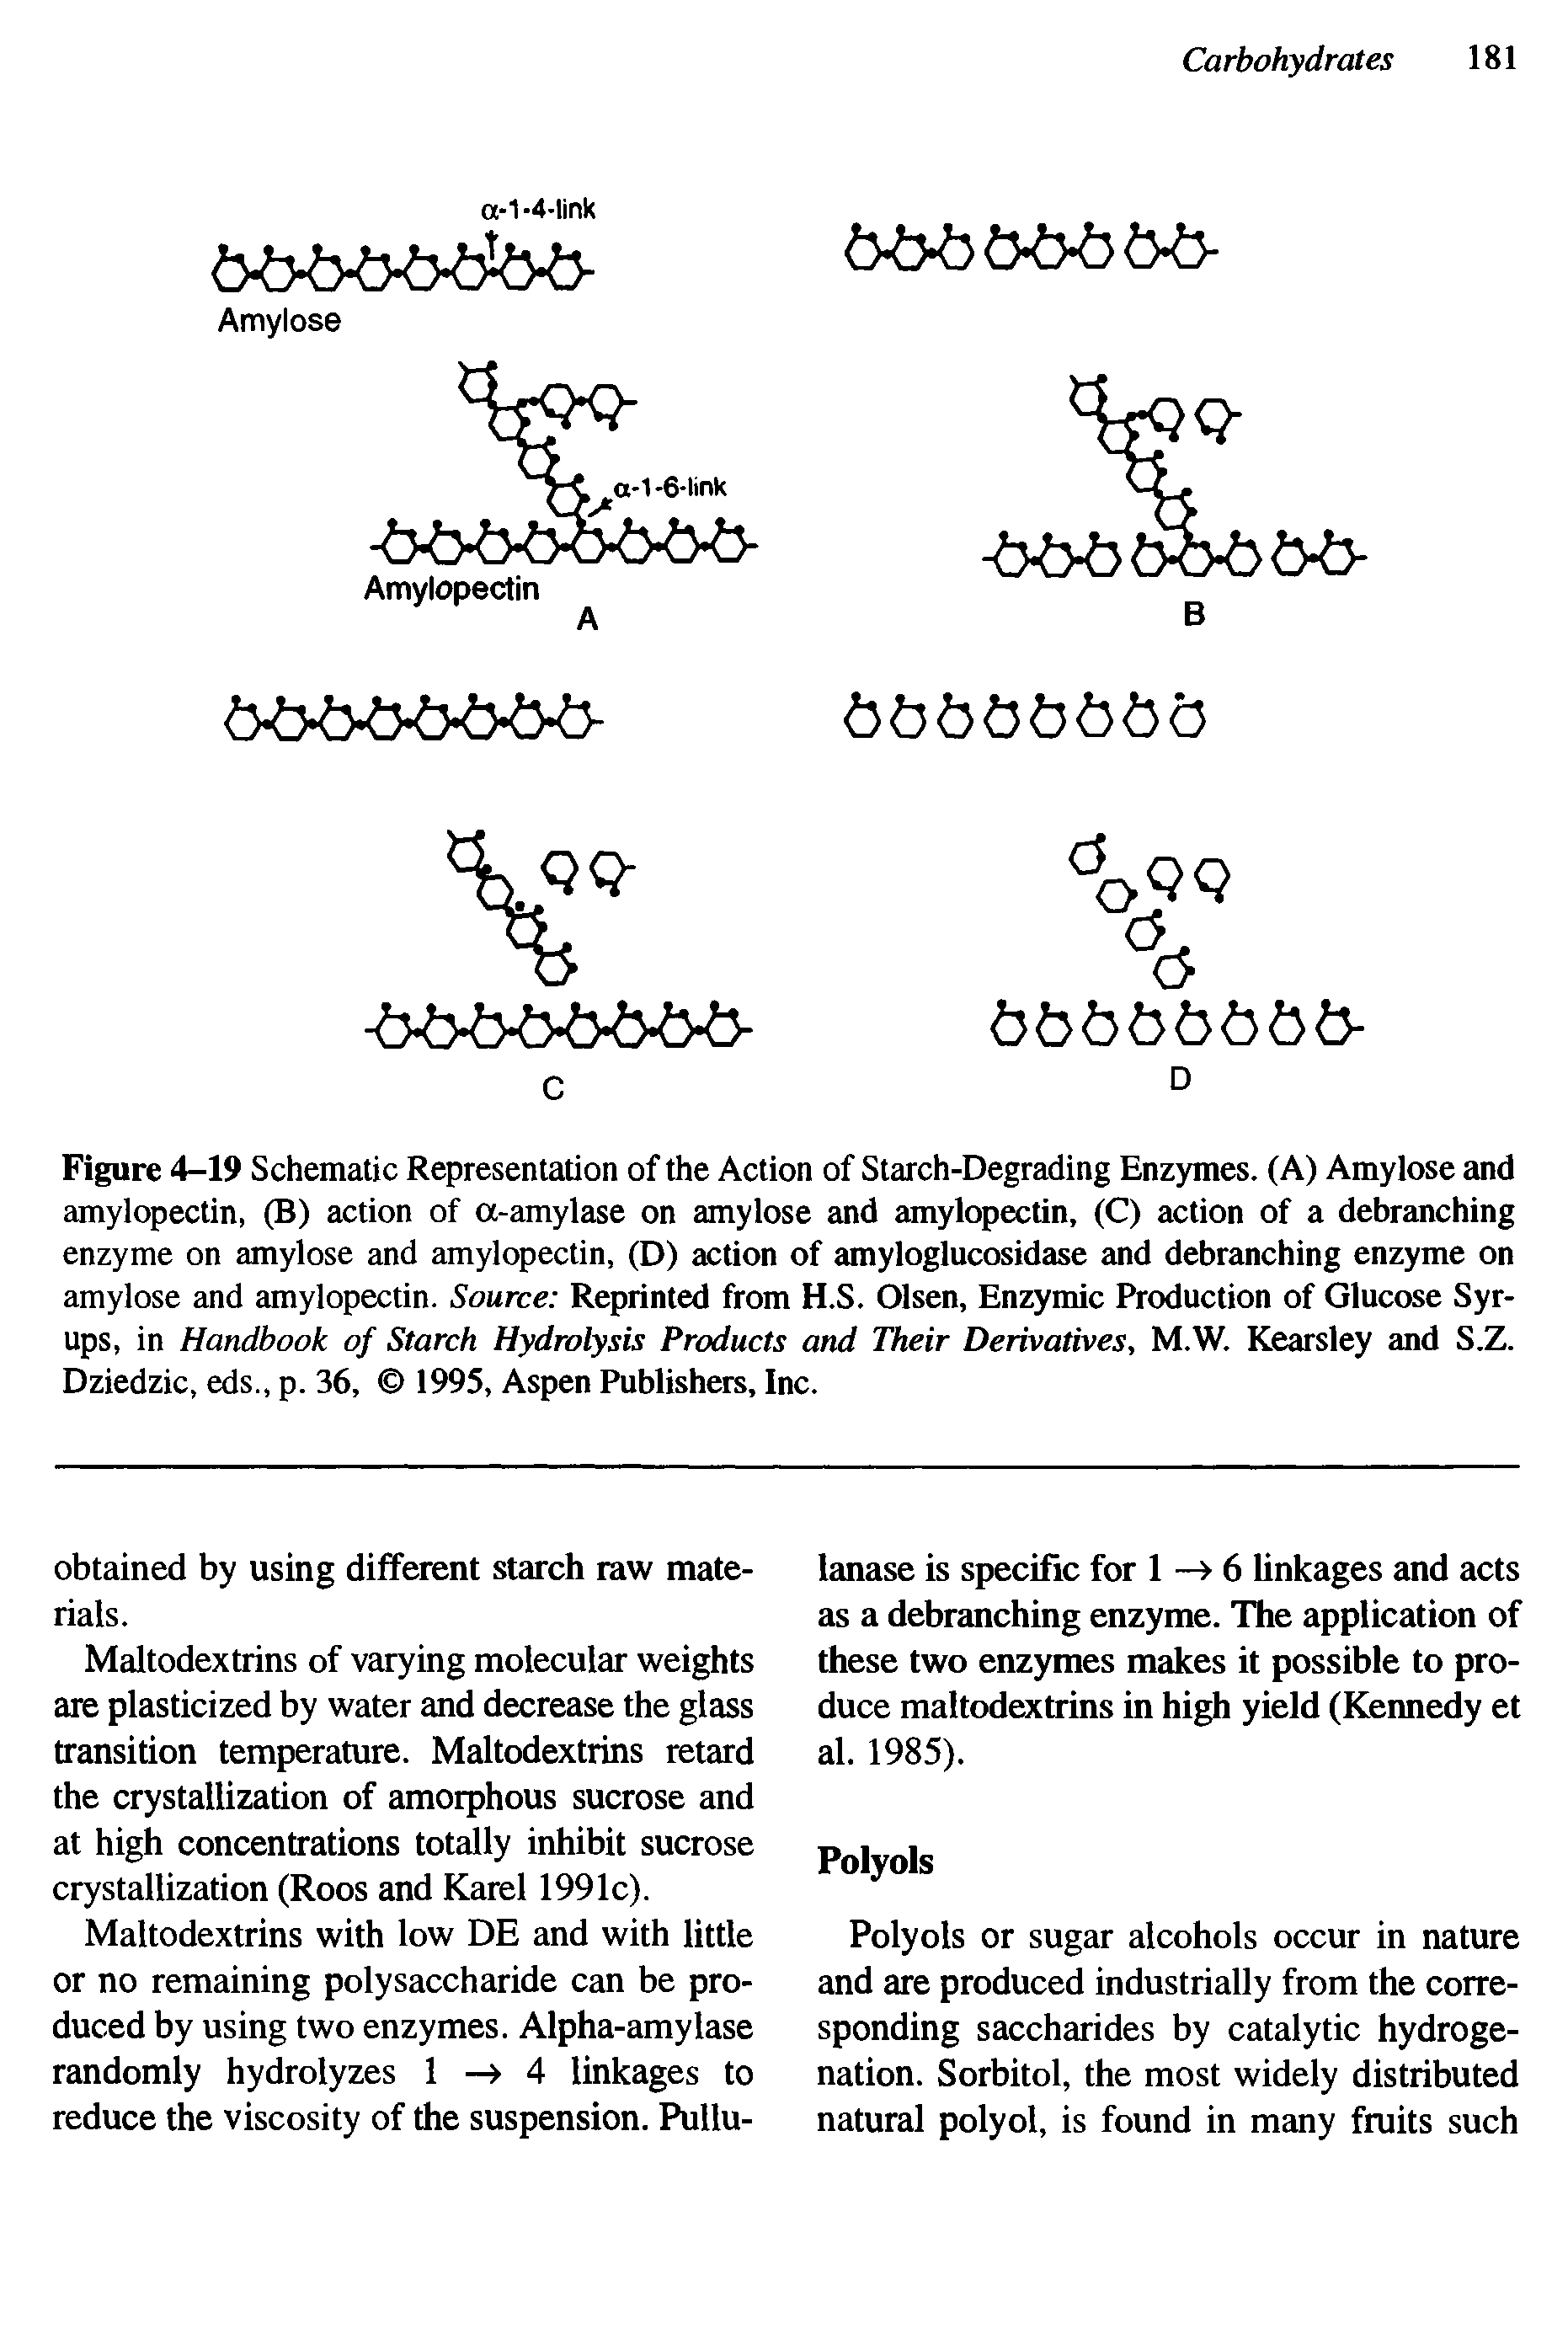 Figure 4-19 Schematic Representation of the Action of Starch-Degrading Enzymes. (A) Amylose and amylopectin, (B) action of a-amylase on amylose and amylopectin, (C) action of a debranching enzyme on amylose and amylopectin, (D) action of amyloglucosidase and debranching enzyme on amylose and amylopectin. Source Reprinted from H.S. Olsen, Enzymic Production of Glucose Syrups, in Handbook of Starch Hydrolysis Products and Their Derivatives, M.W. Kearsley and S.Z. Dziedzic, eds., p. 36, 1995, Aspen Publishers, Inc.